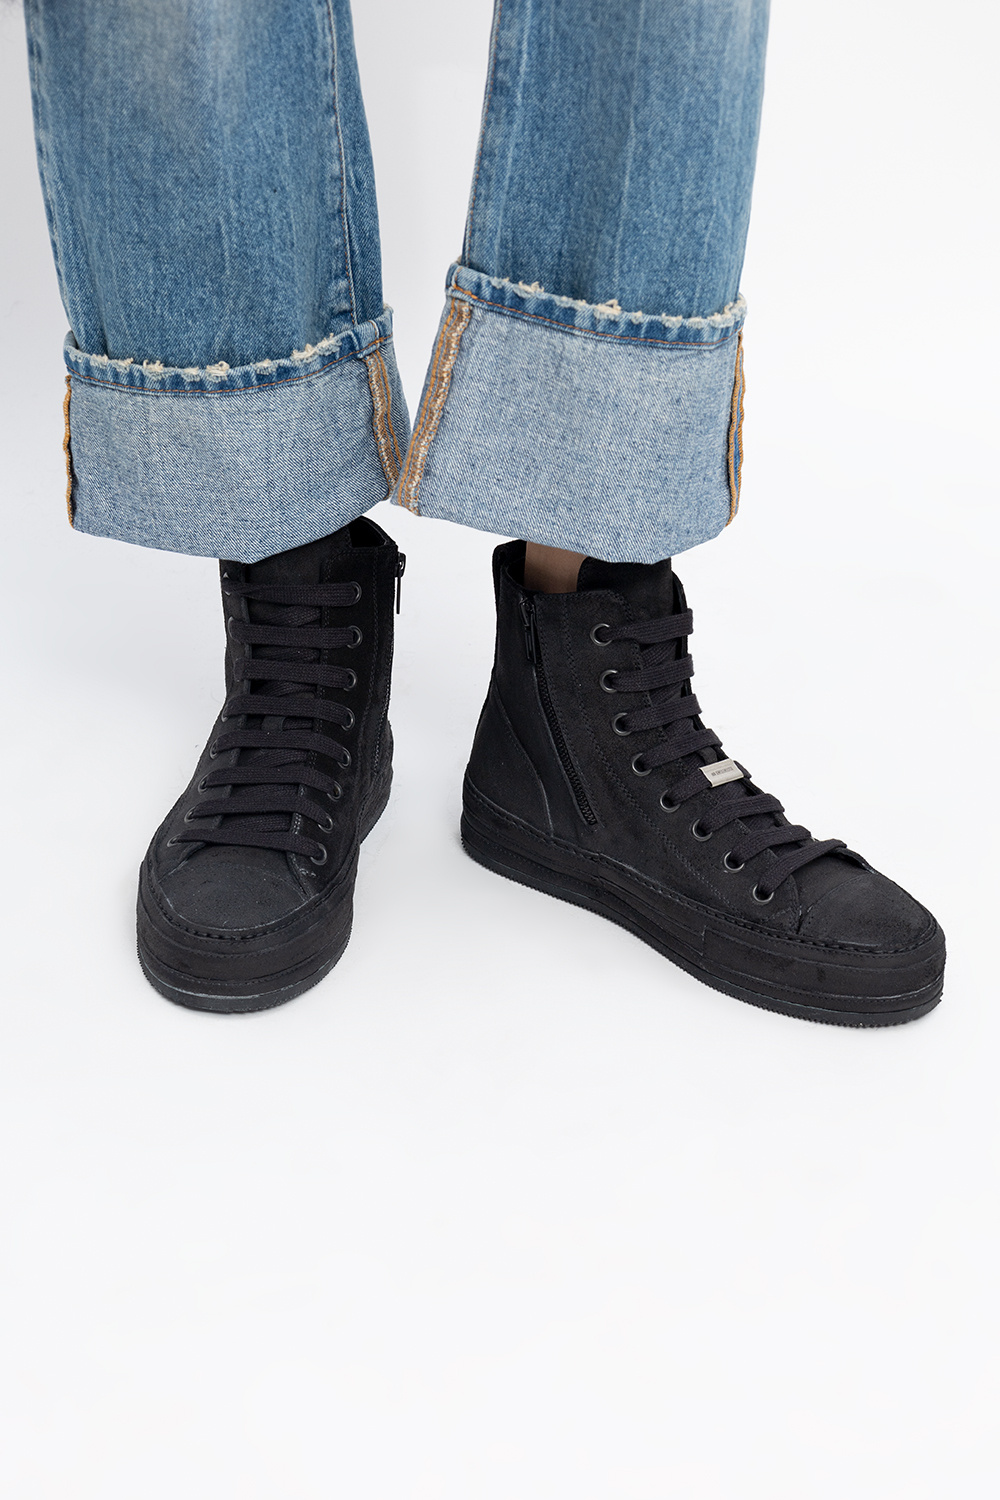 Ann Demeulemeester - Henrica Ankle Boot  HBX - Globally Curated Fashion  and Lifestyle by Hypebeast